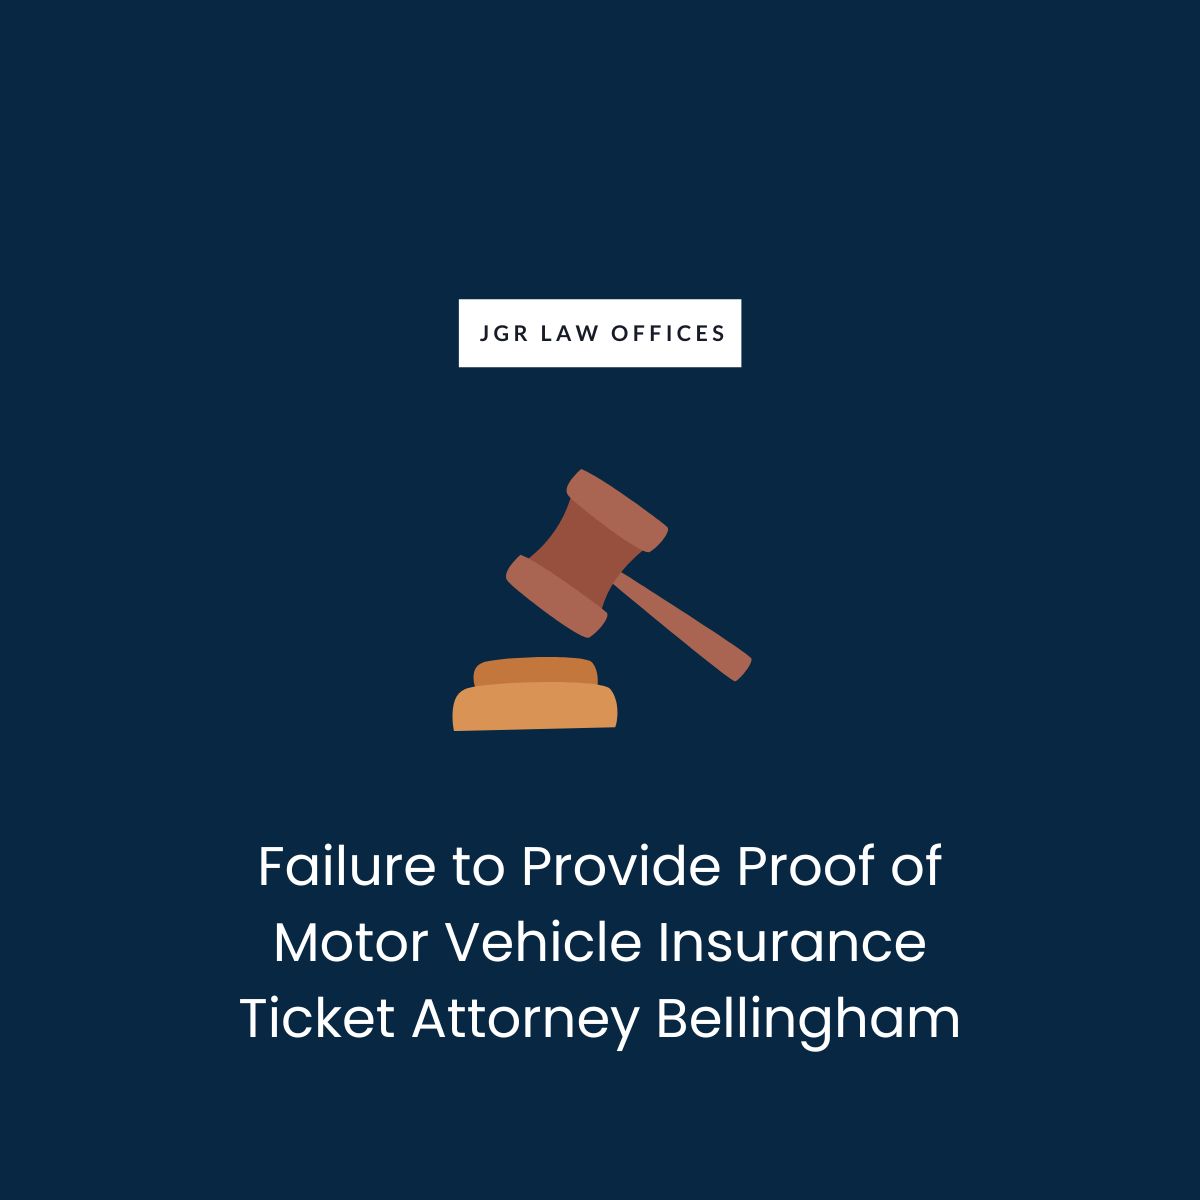 Failure to Provide Proof of Motor Vehicle Insurance Ticket Attorney Bellingham